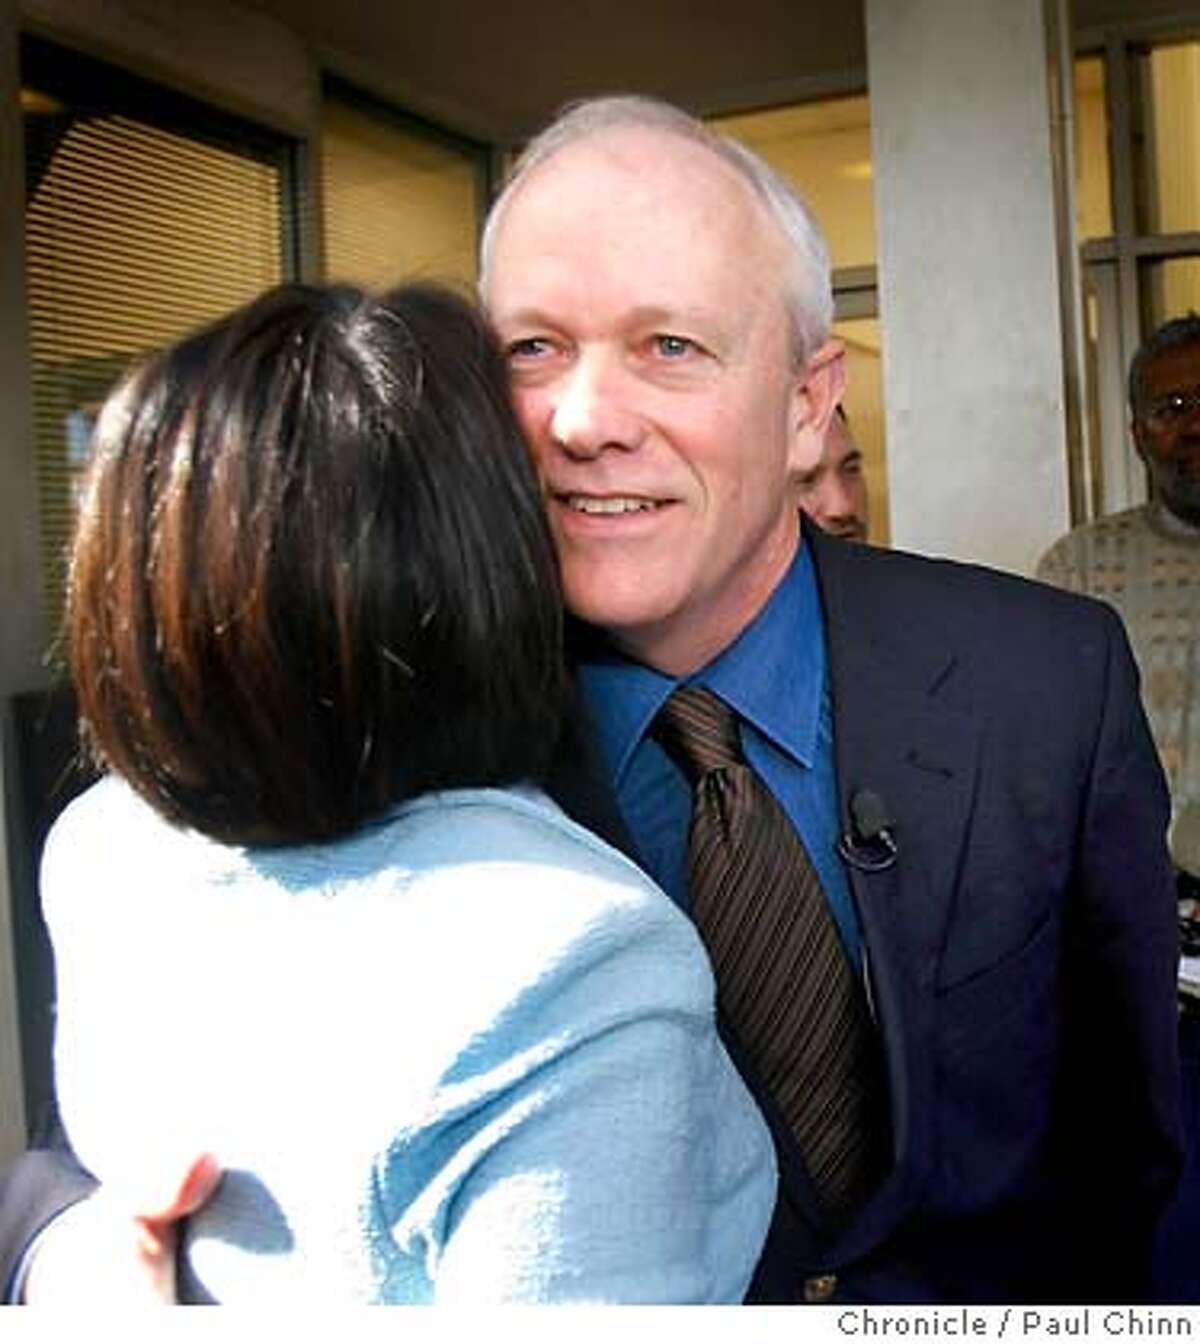 A supporter hugs Jerry McNerney at a Democratic Party victory rally in Oakland, Calif. on Wednesday, Nov. 8, 2006. McNerney defeated incumbent Rebublican Richard Pombo in the 11th district Congressional race. PAUL CHINN/The Chronicle **Jerry McNerney, Richard Pombo